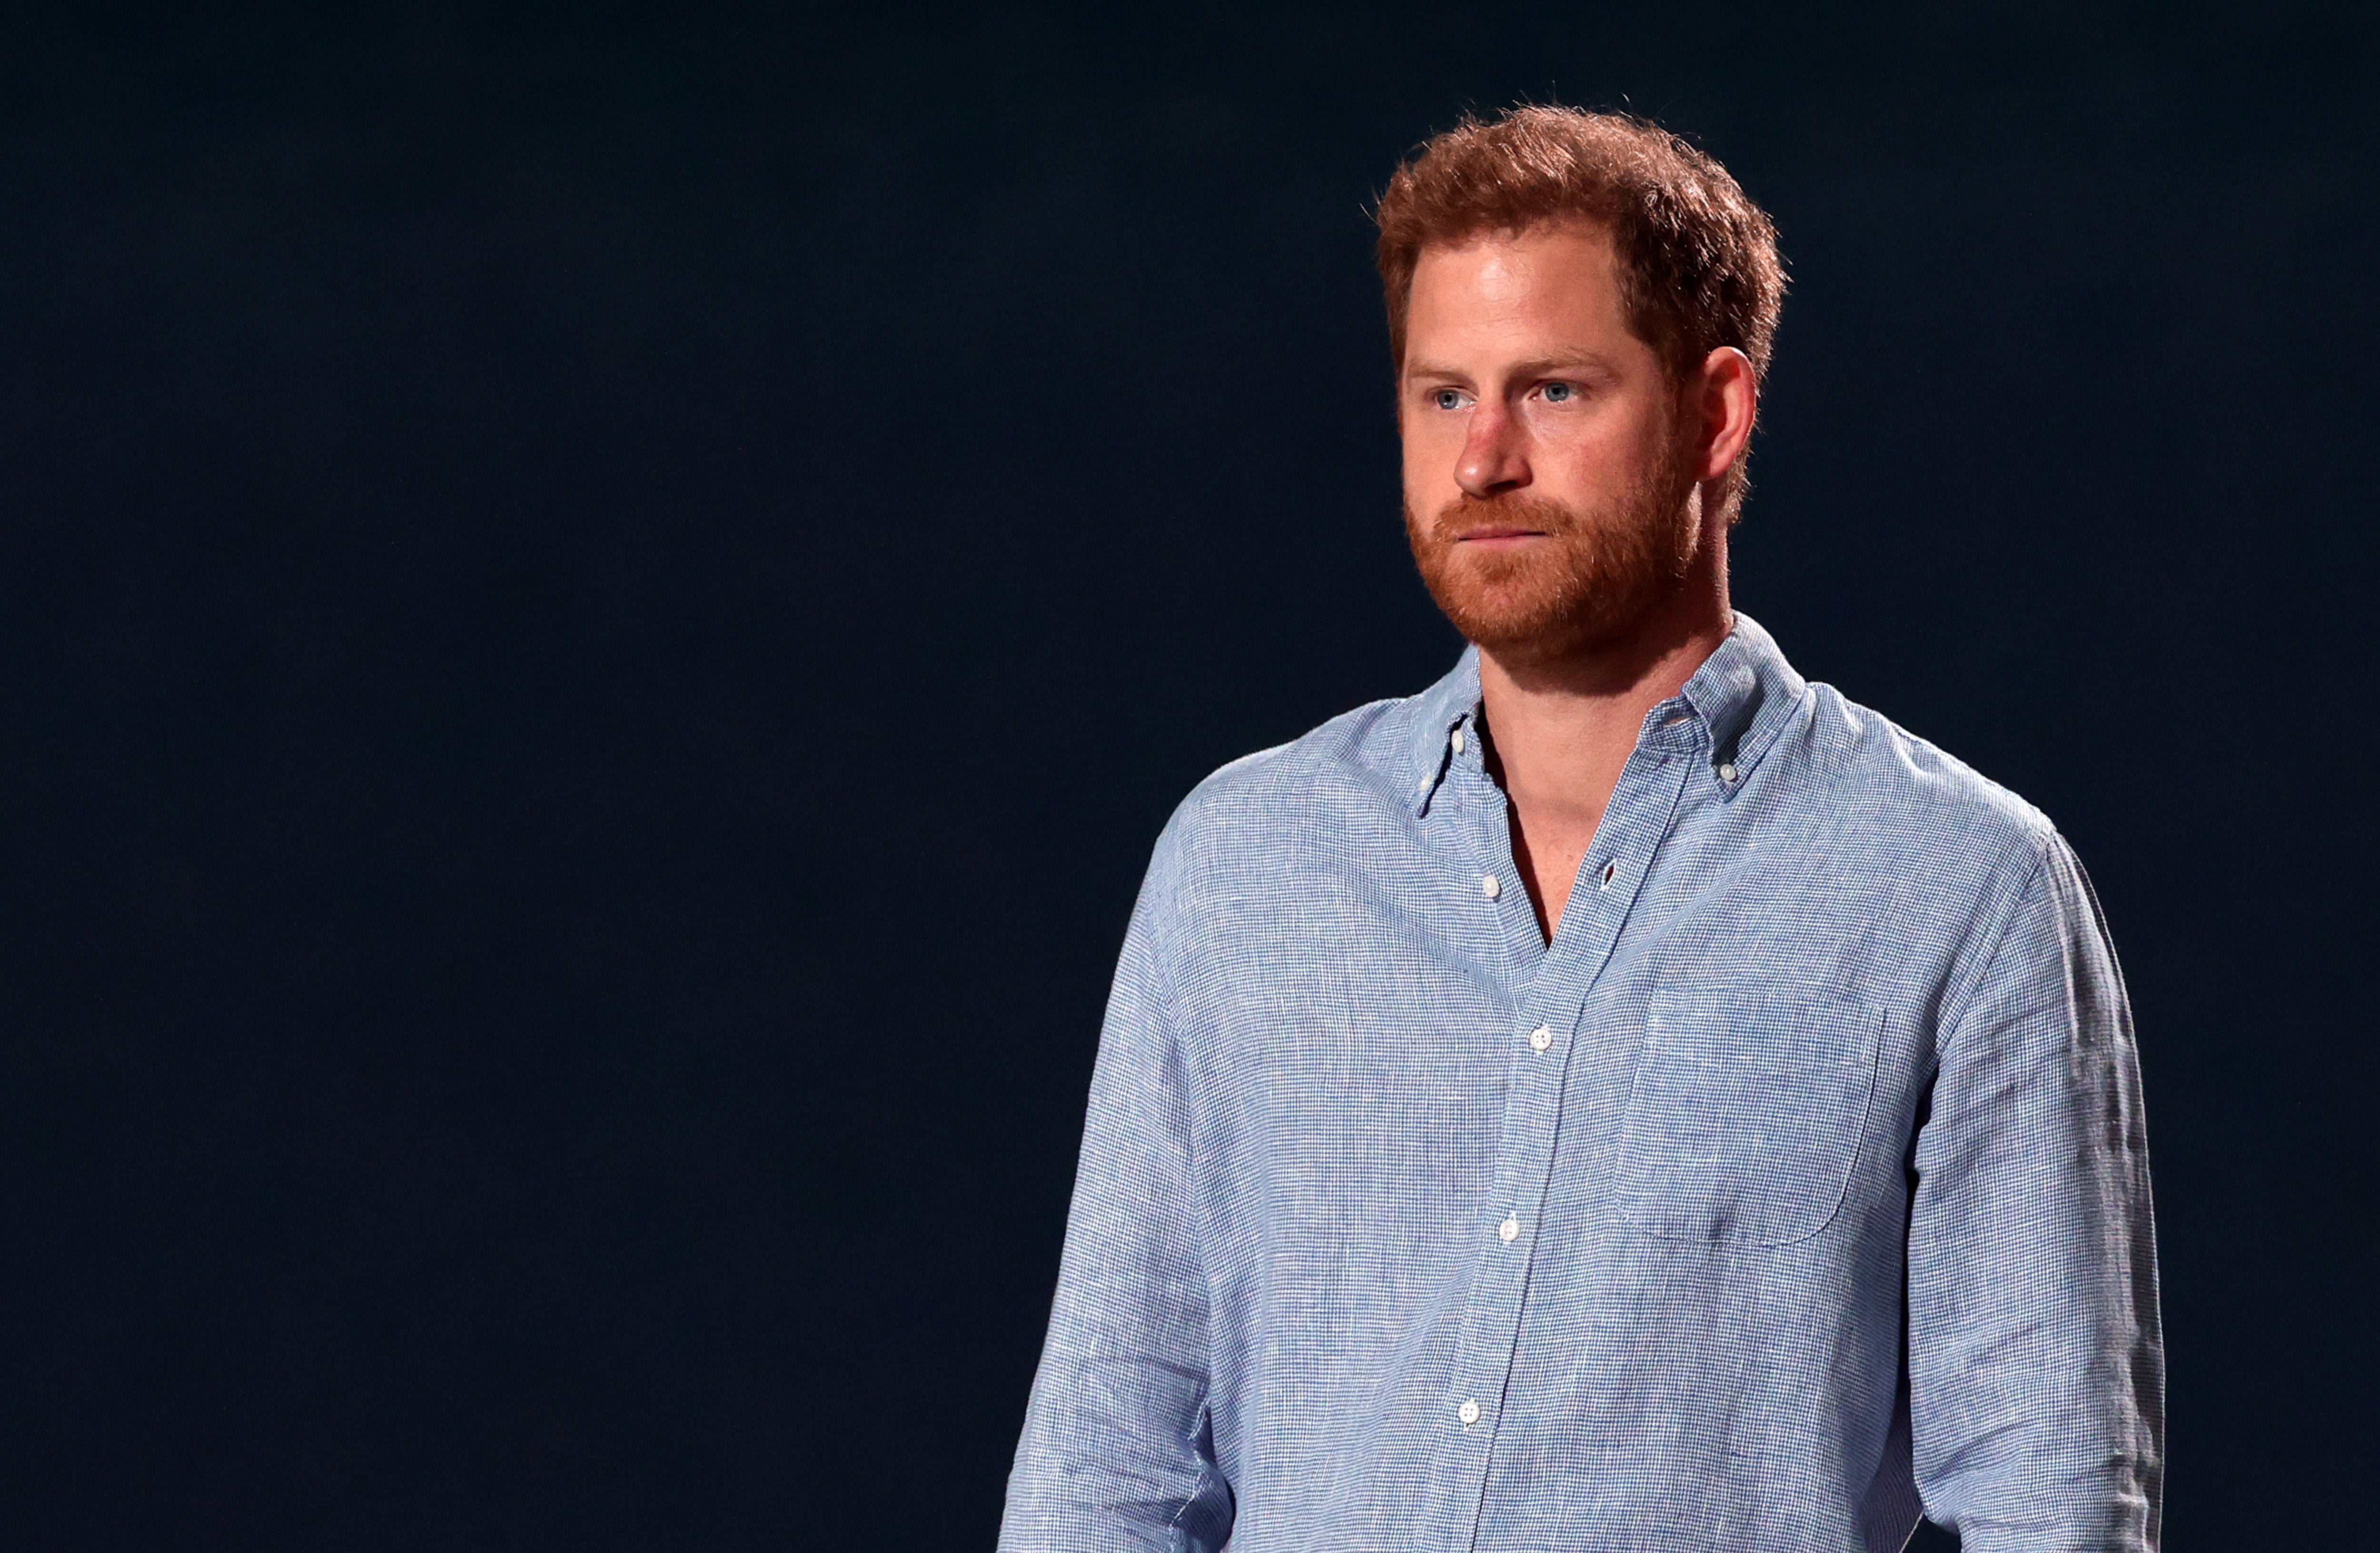 Prince Harry does not feel safe in the UK without police protection